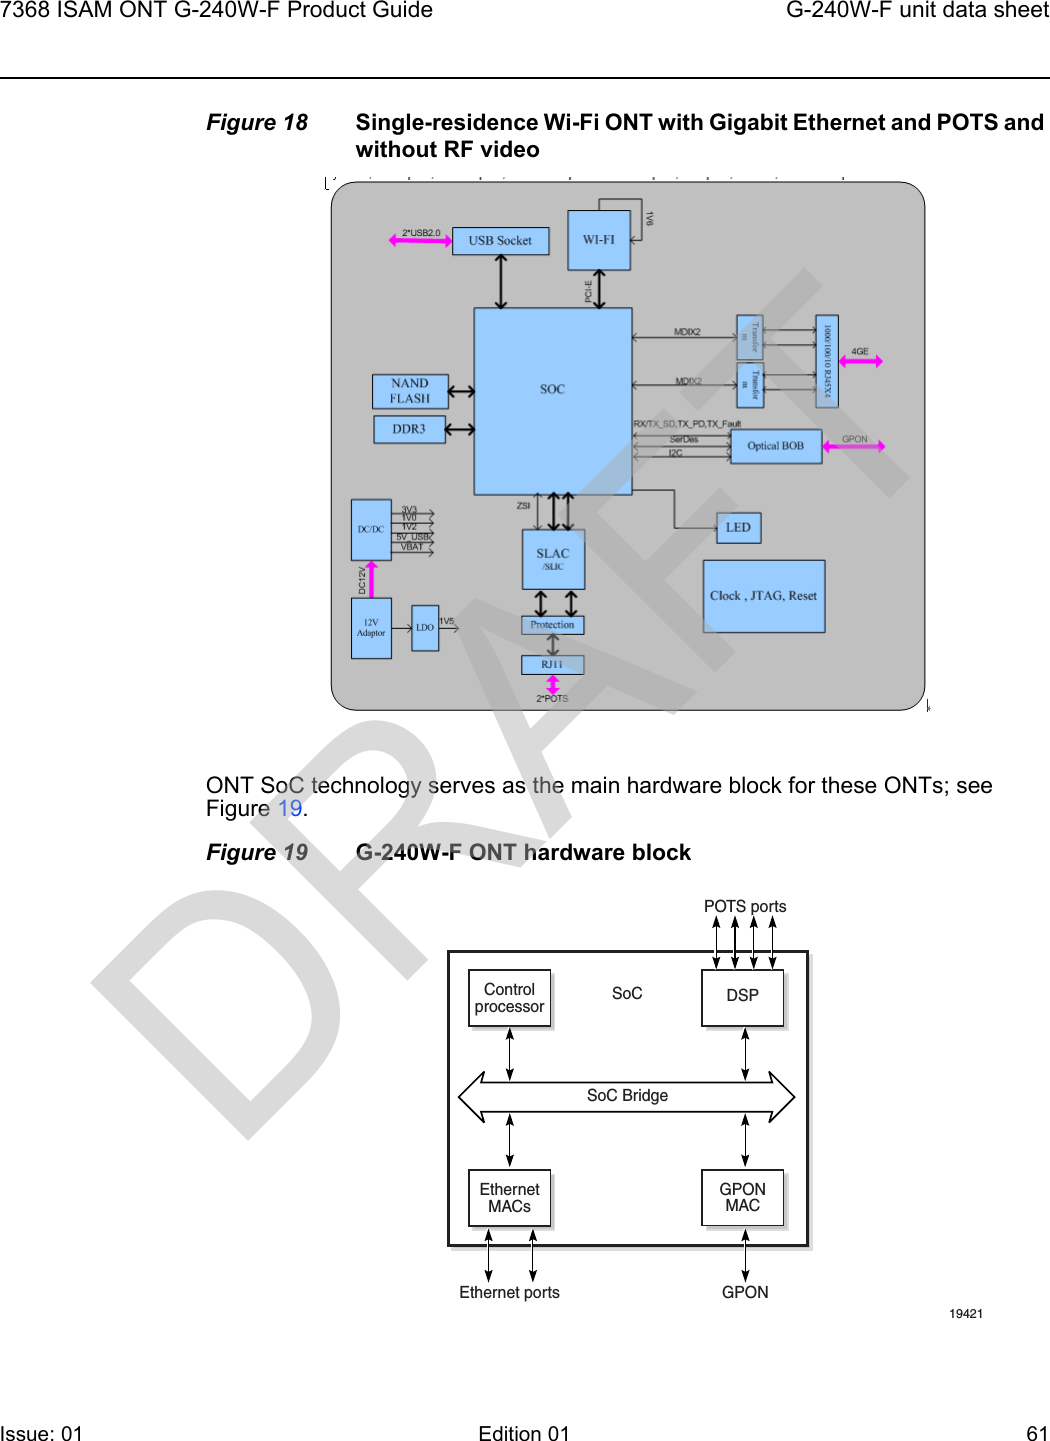 7368 ISAM ONT G-240W-F Product Guide G-240W-F unit data sheetIssue: 01 Edition 01 61 Figure 18 Single-residence Wi-Fi ONT with Gigabit Ethernet and POTS and without RF videoONT SoC technology serves as the main hardware block for these ONTs; see Figure 19.Figure 19 G-240W-F ONT hardware blockControlprocessorEthernetMACsEthernet ports GPONPOTS portsDSPGPONMACSoC19421SoC BridgeDRAFT